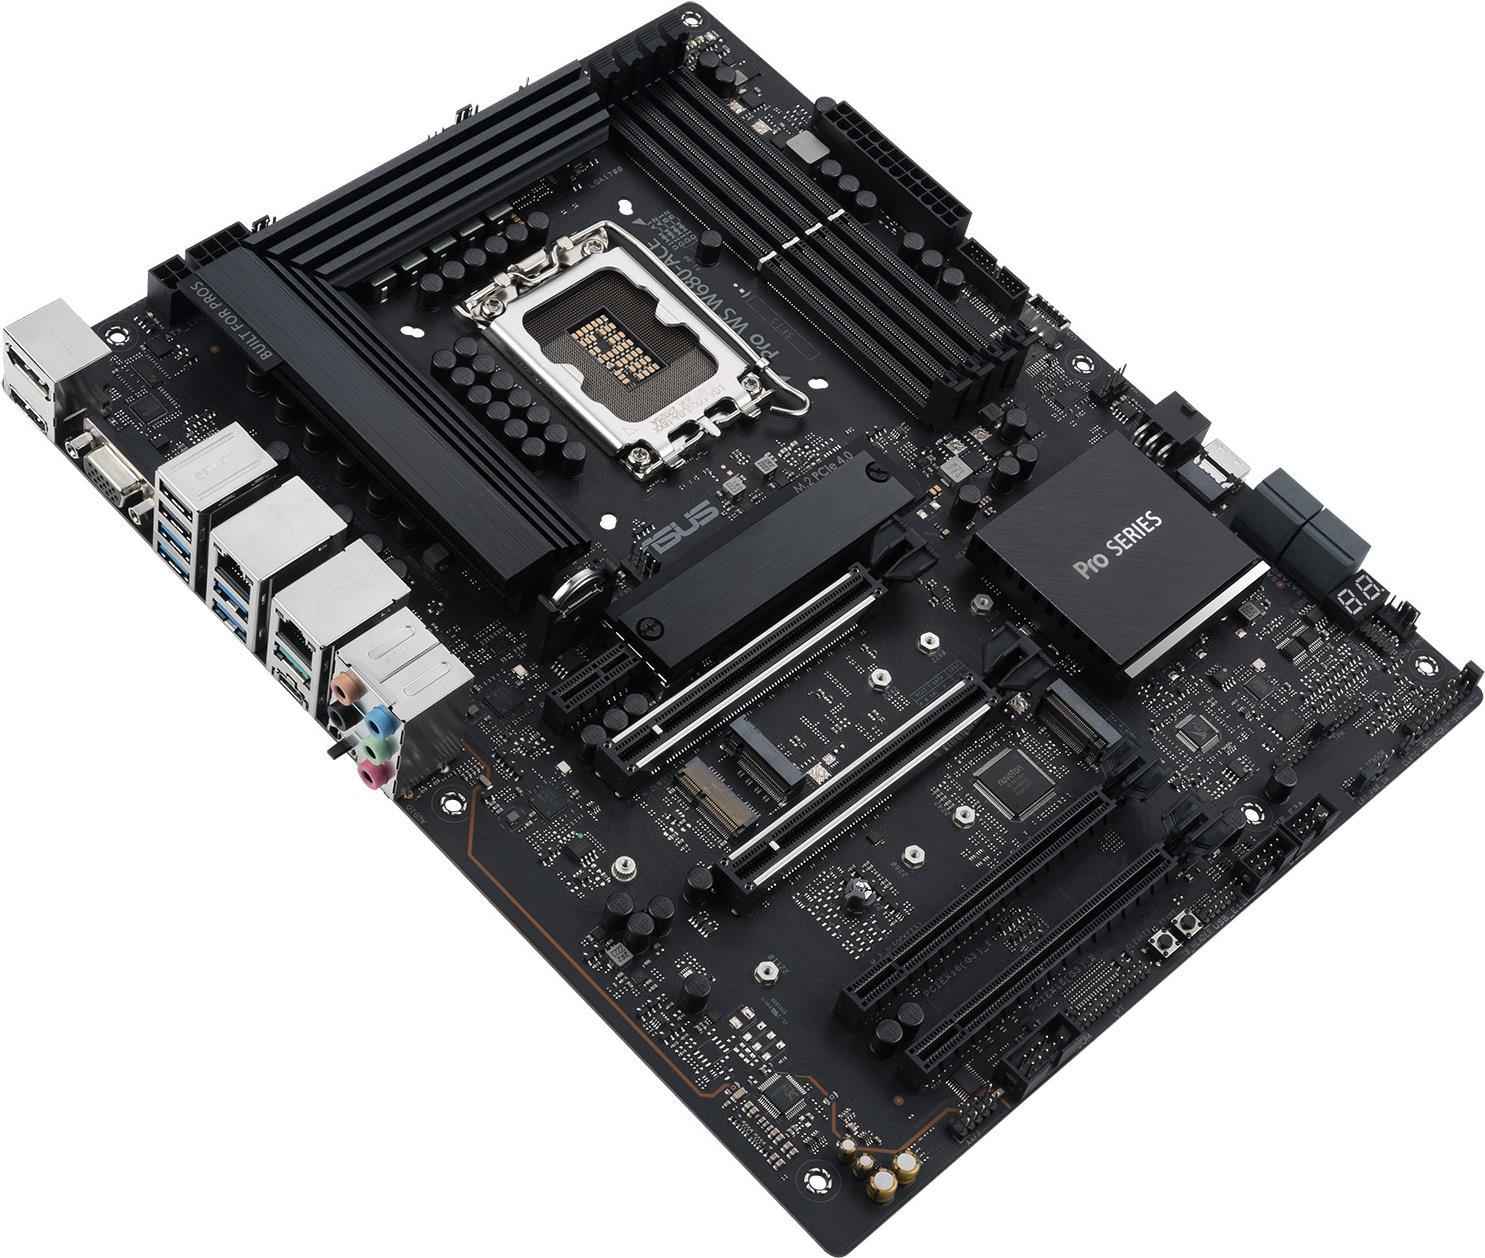 ASUS PRO WS W680-ACE (90MB1DZ0-M0EAY0)